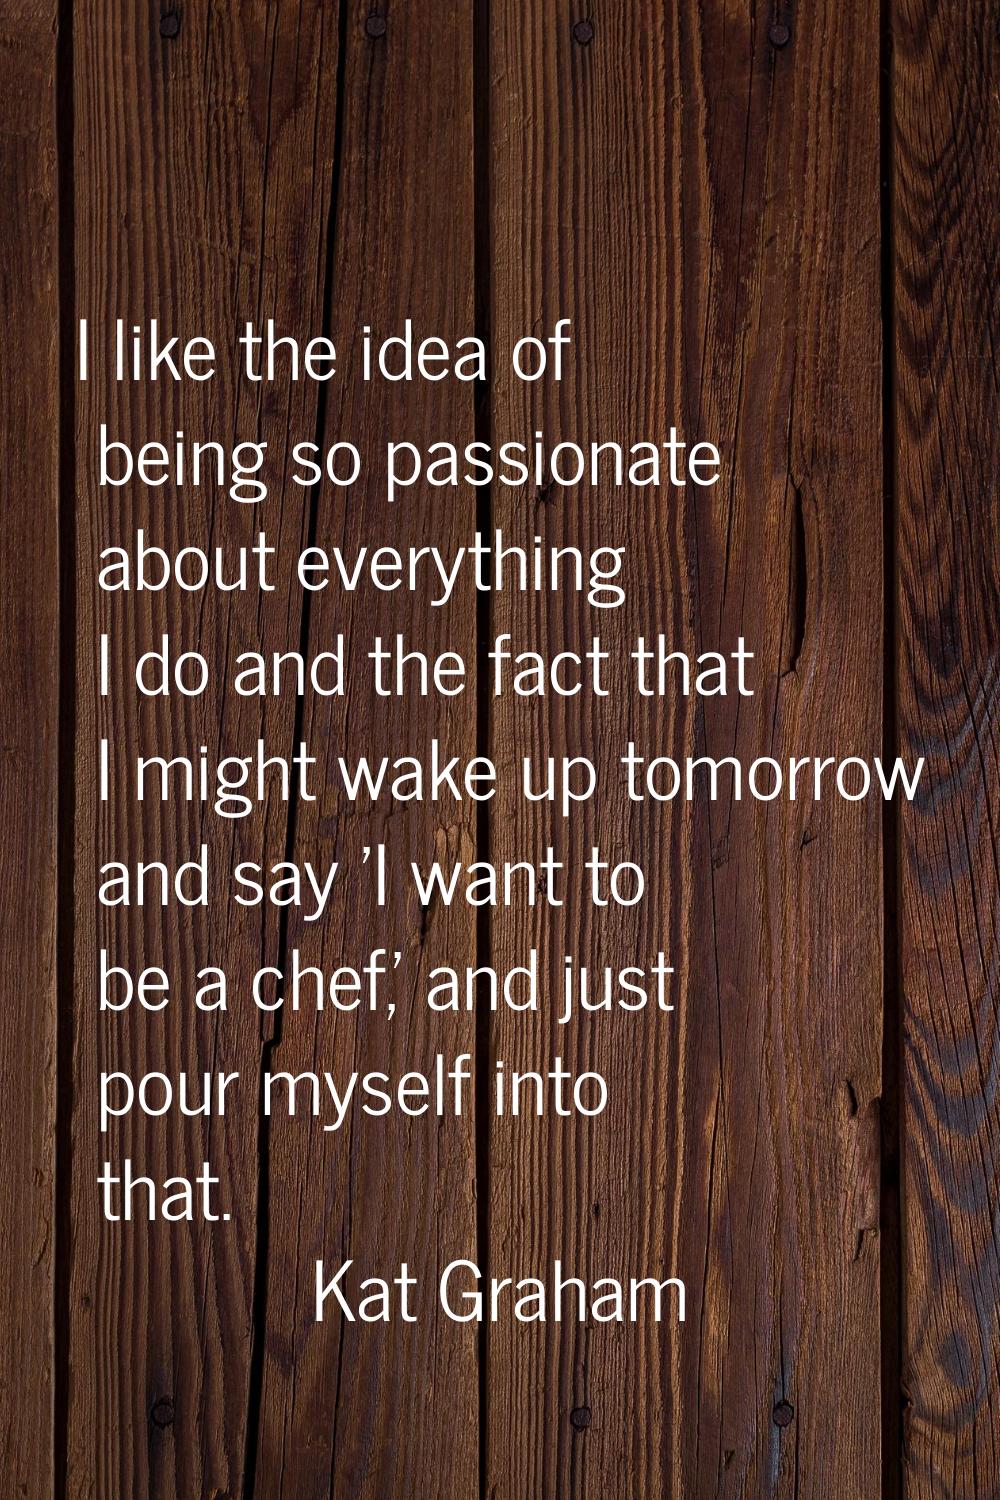 I like the idea of being so passionate about everything I do and the fact that I might wake up tomo